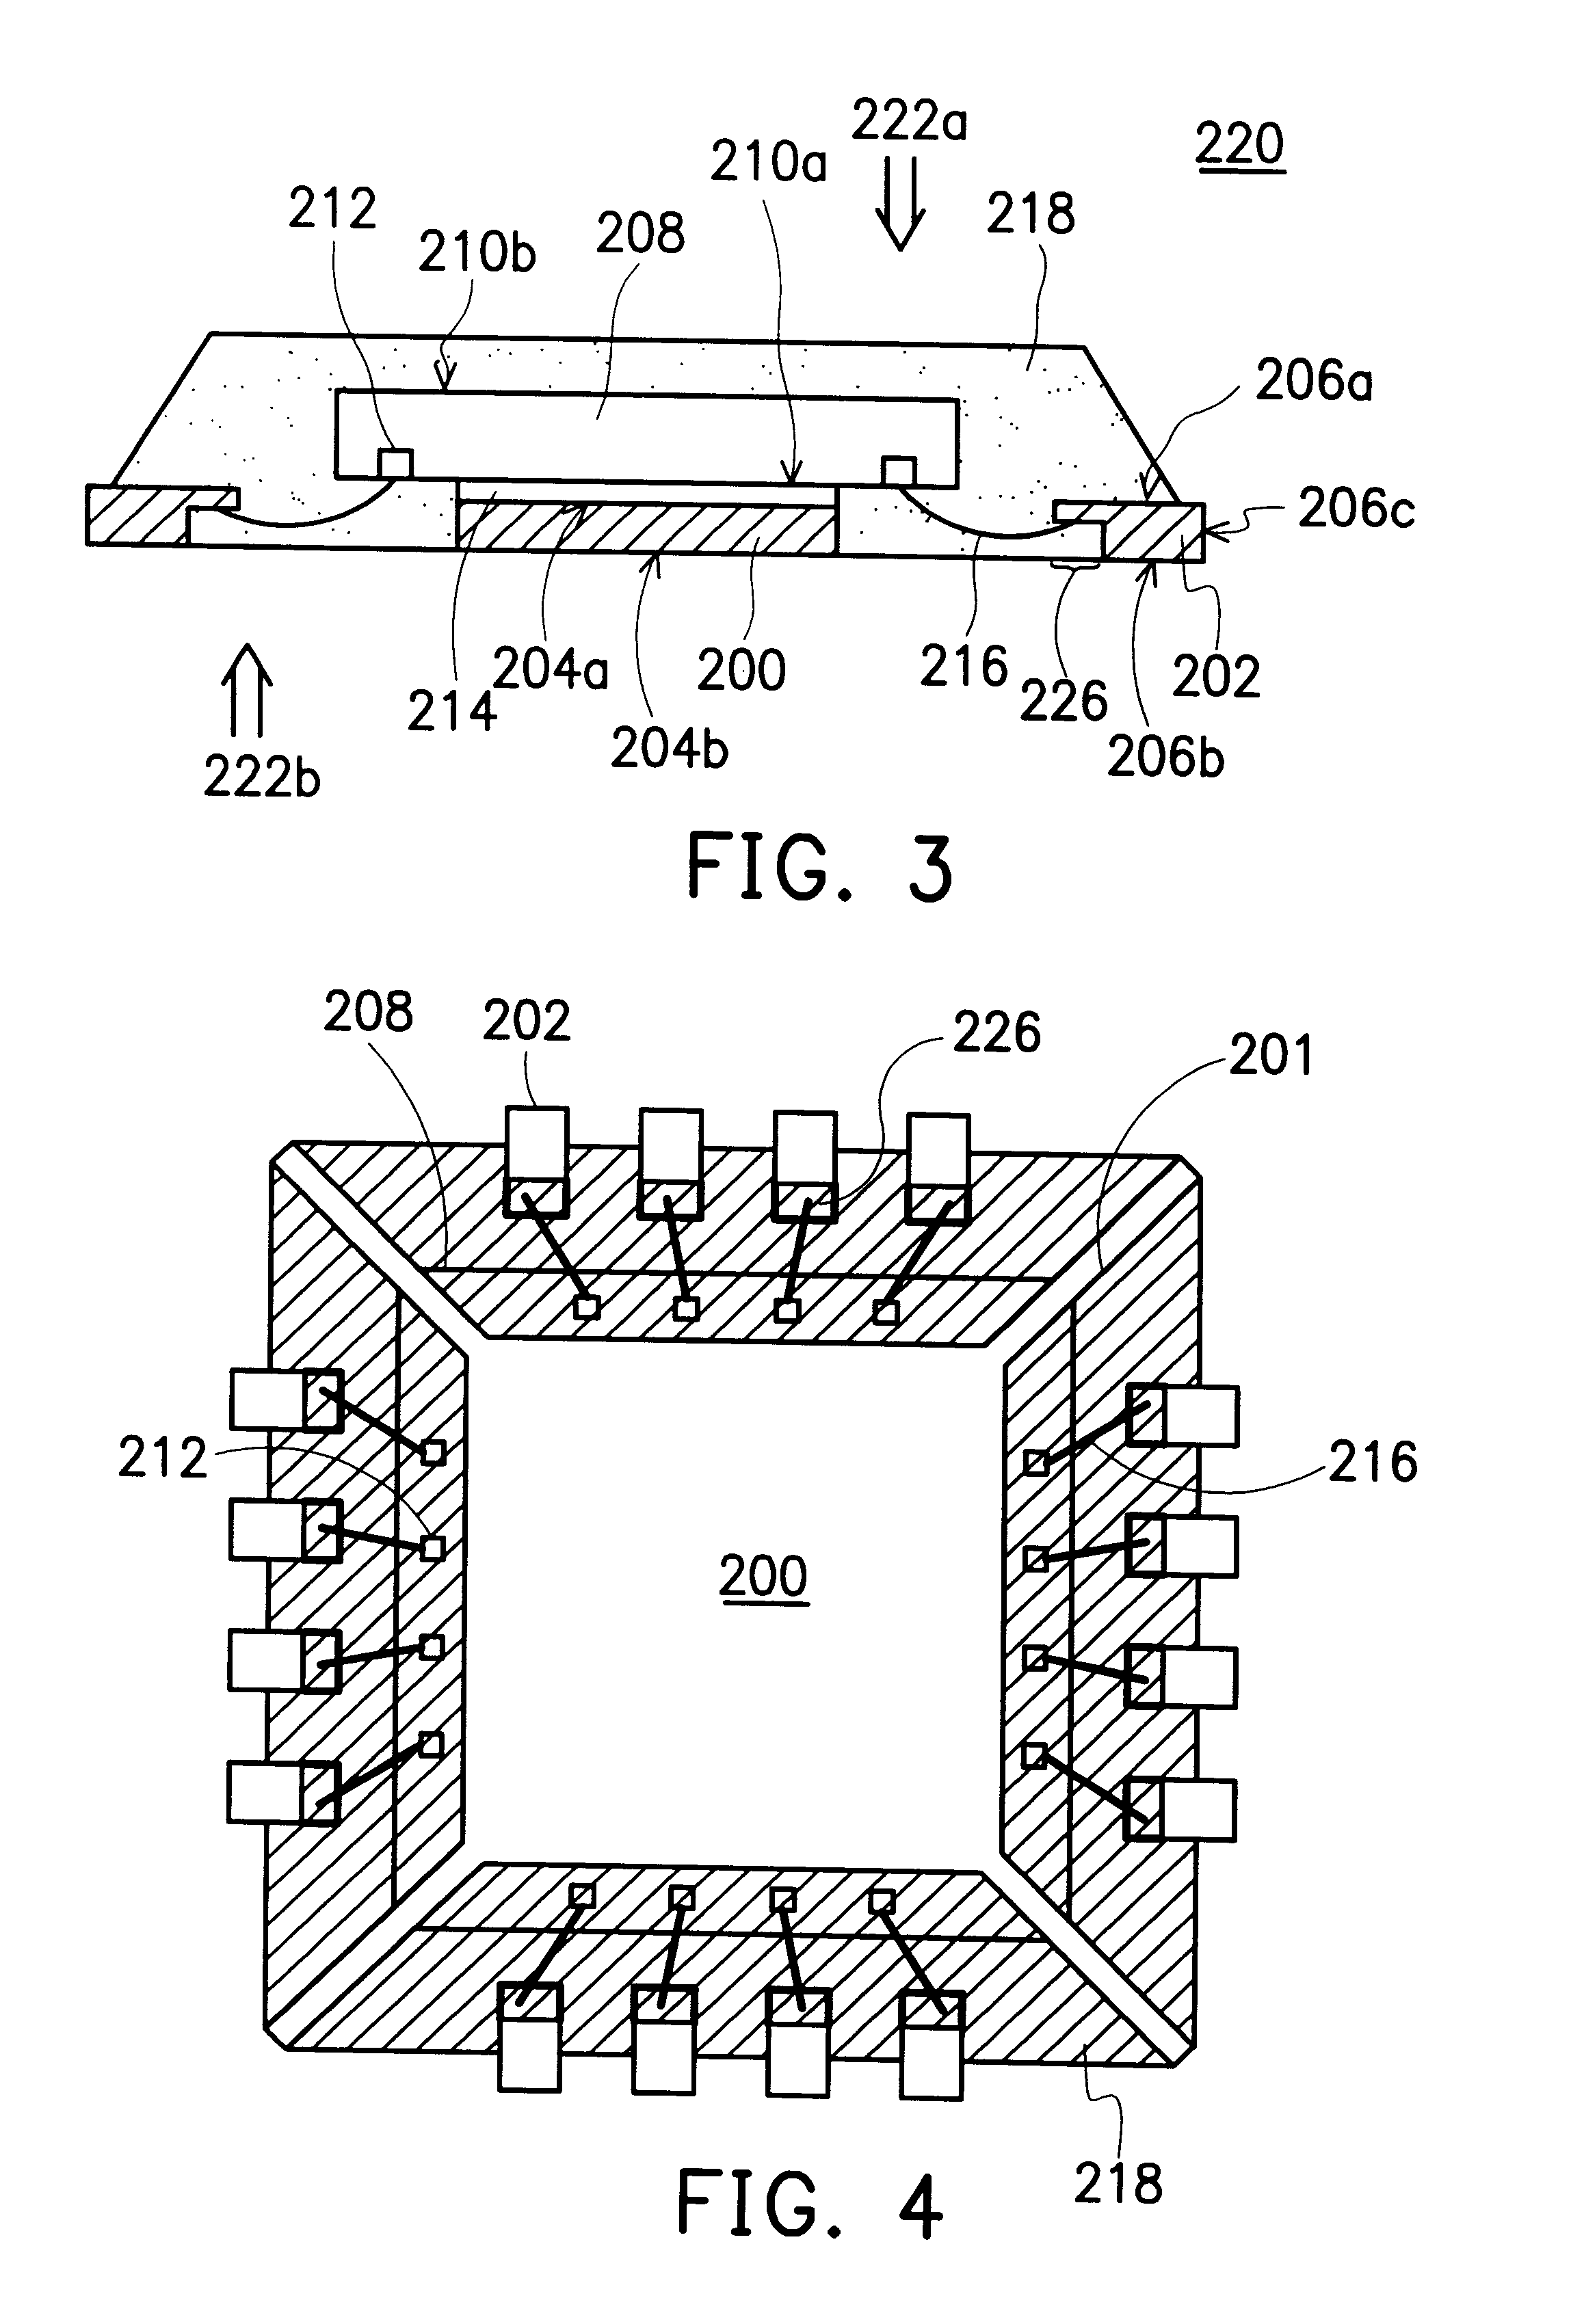 Thermally enhanced quad flat non-lead package of semiconductor